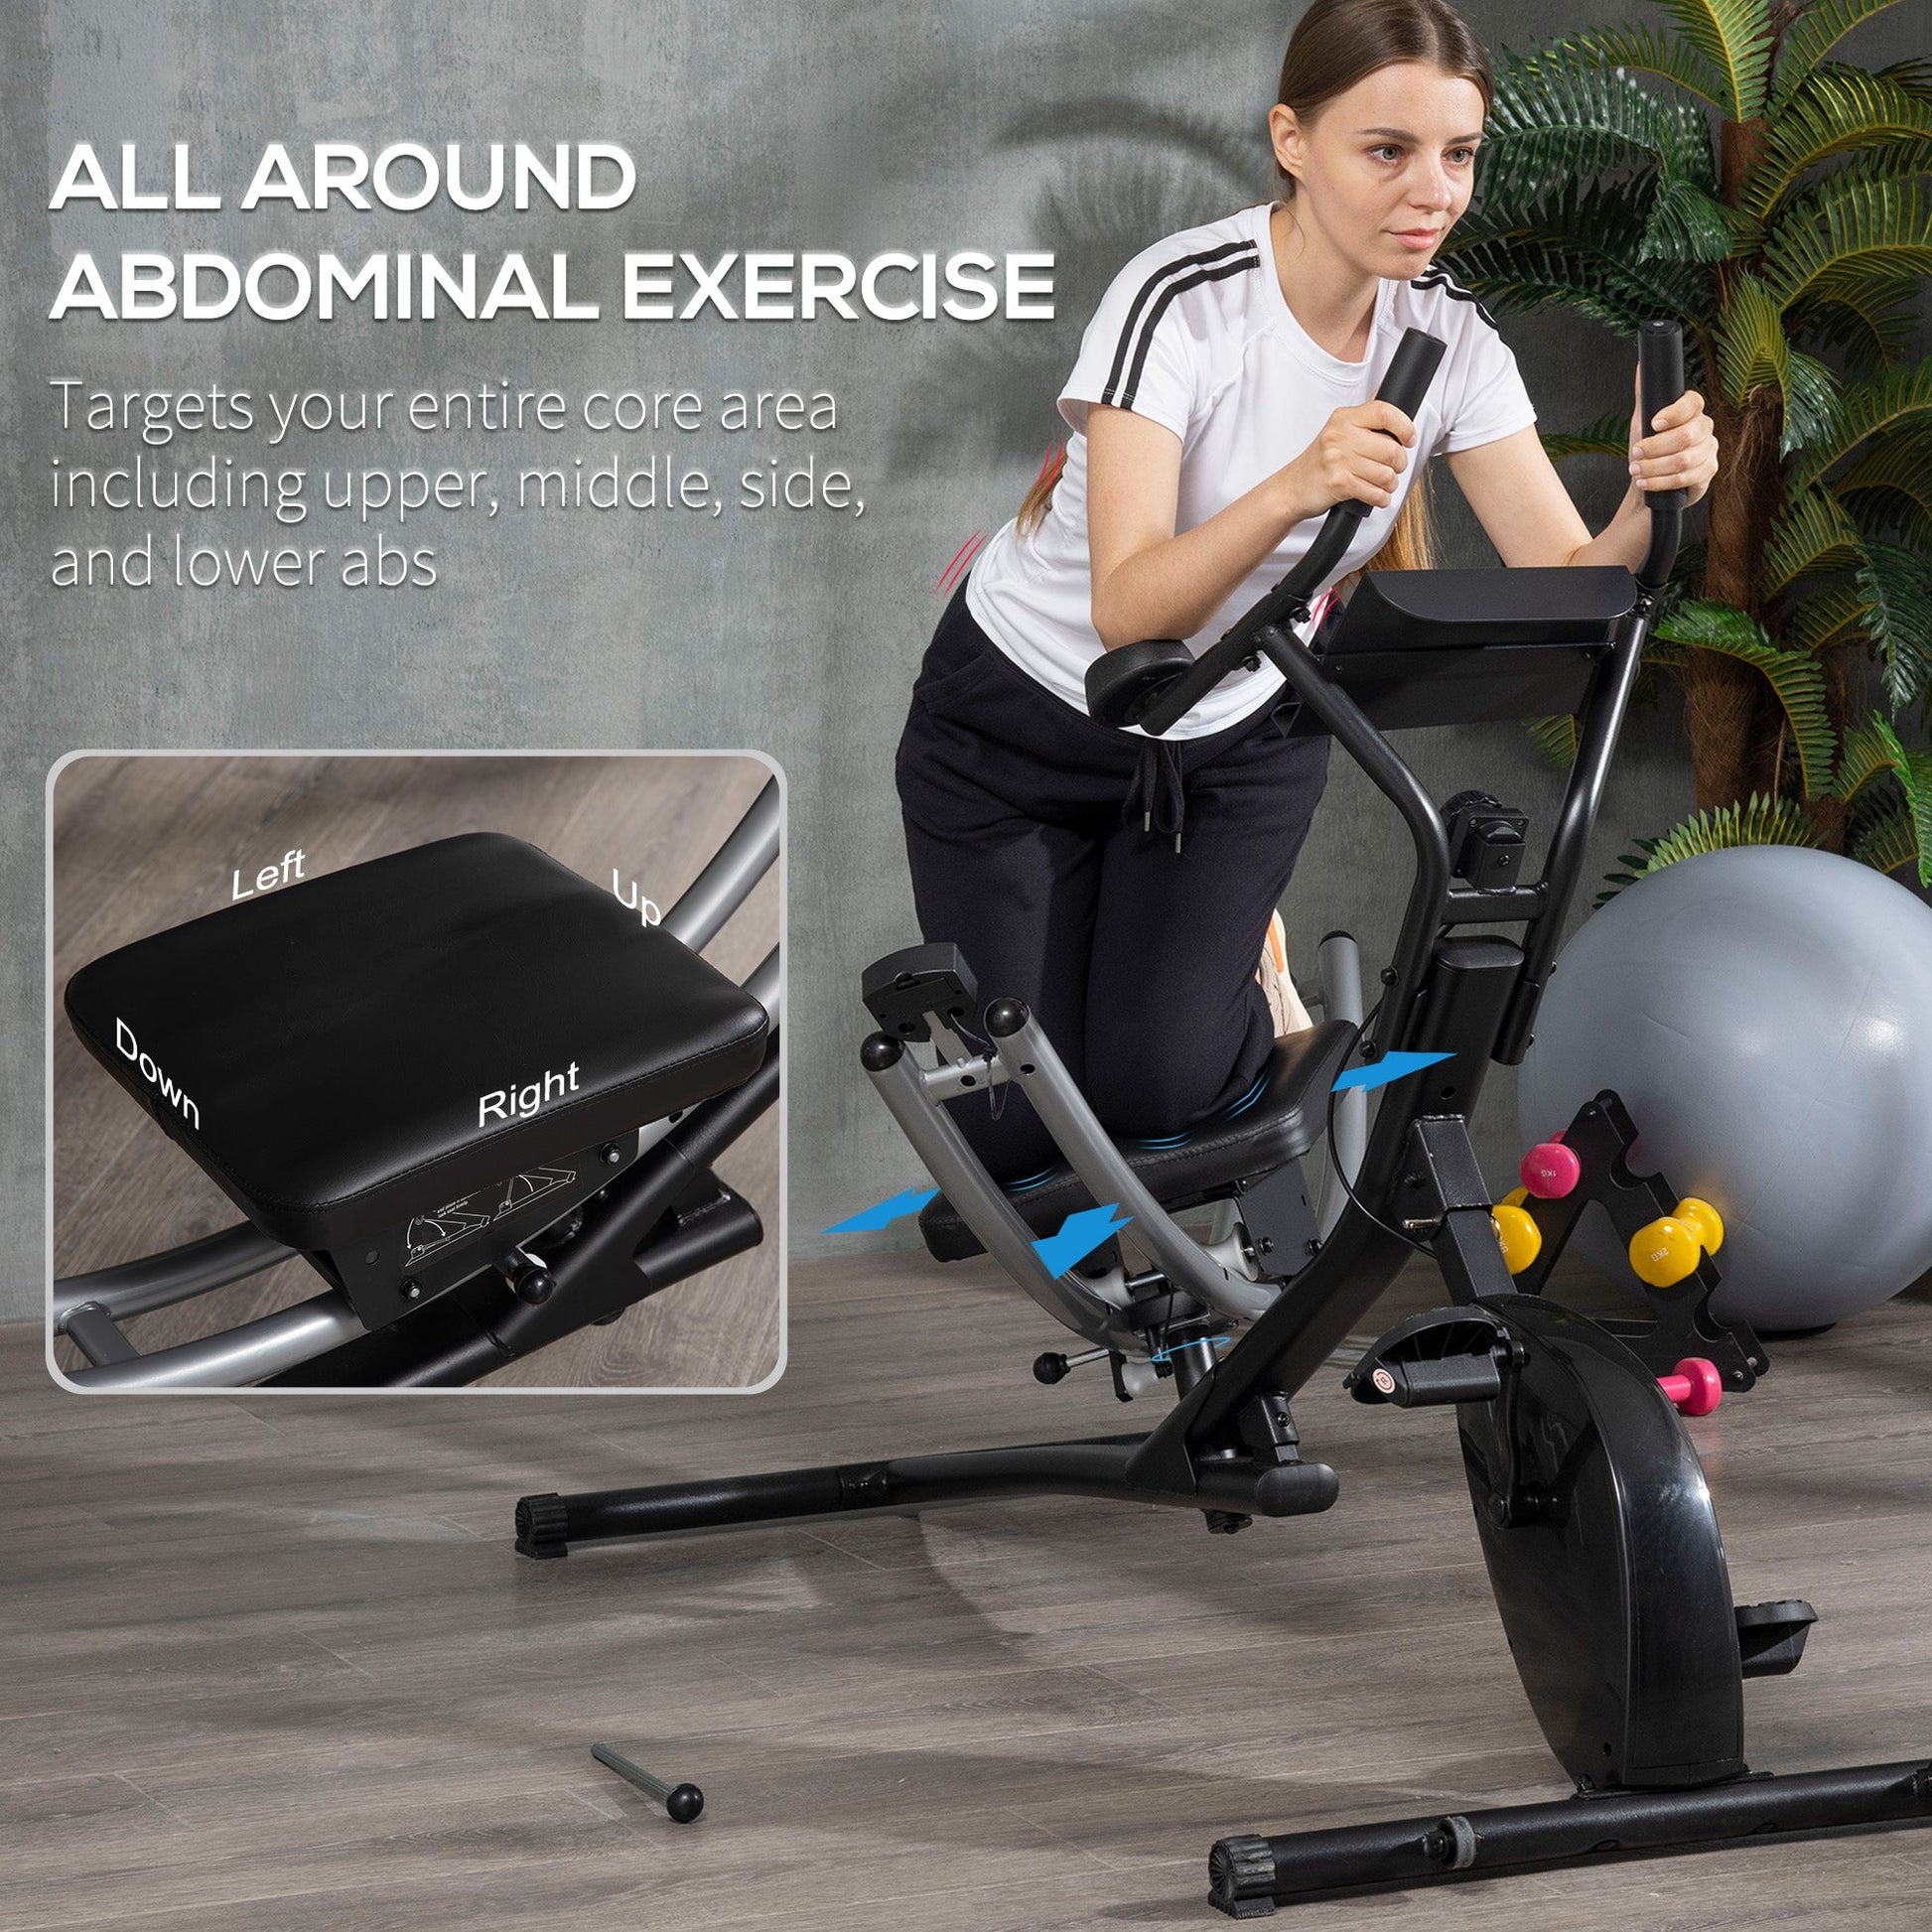 Ab Machine and Exercise Bike, Multi-functional Ab Workout Equipment Side Shaper w/ Three Adjustable Heights, 8-Level Adjustable Resistance and Two Wheels for Home Gym Strength Training at Gallery Canada